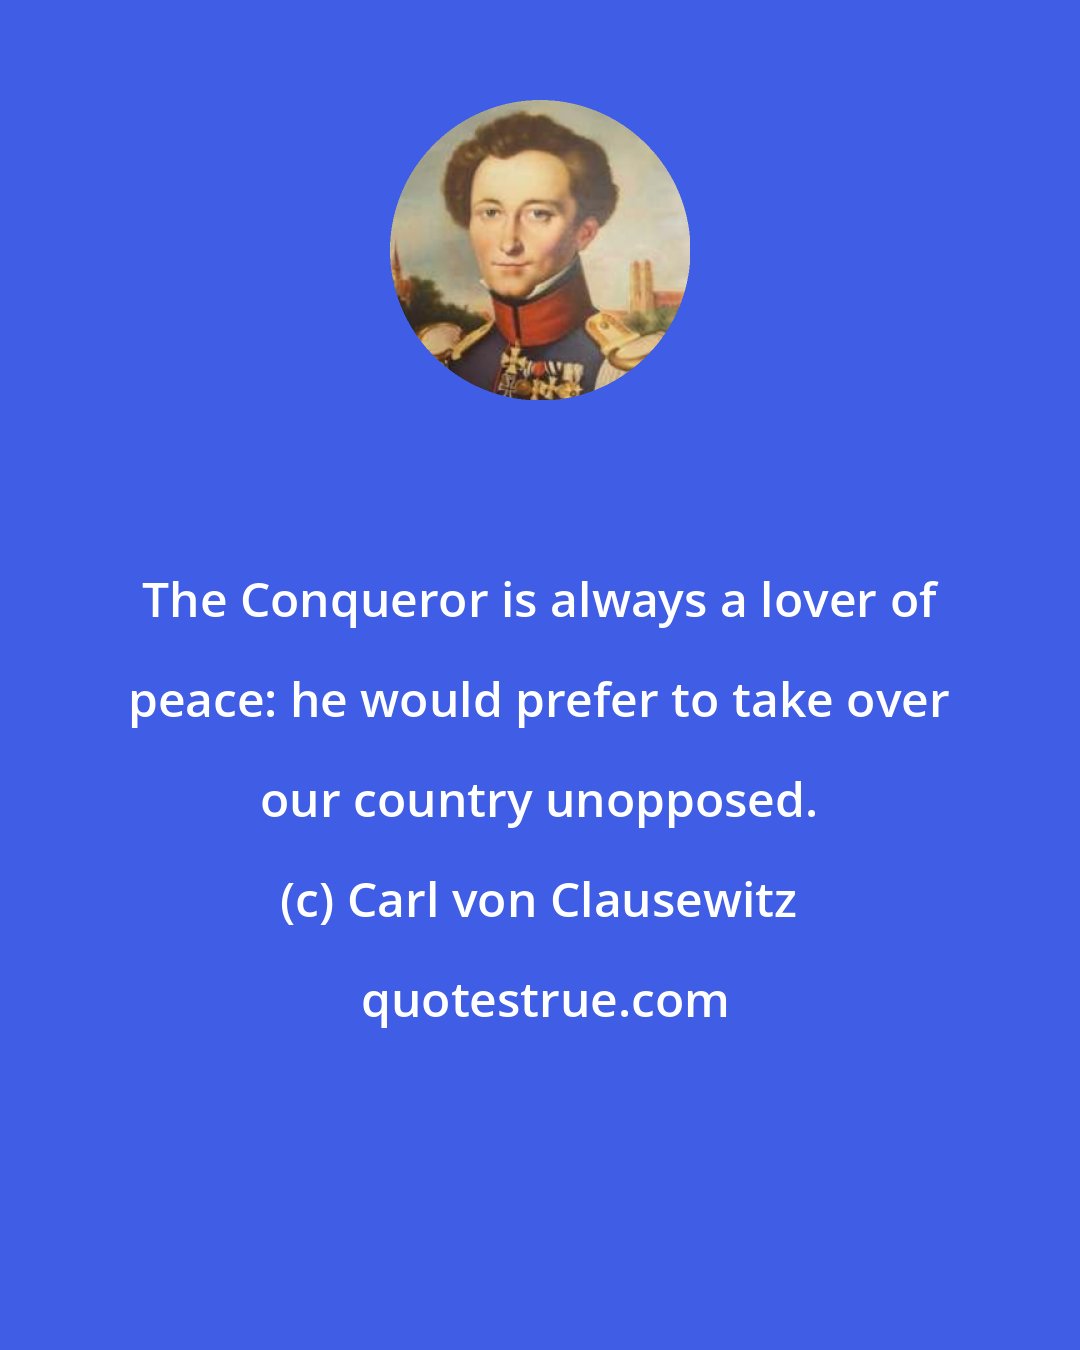 Carl von Clausewitz: The Conqueror is always a lover of peace: he would prefer to take over our country unopposed.